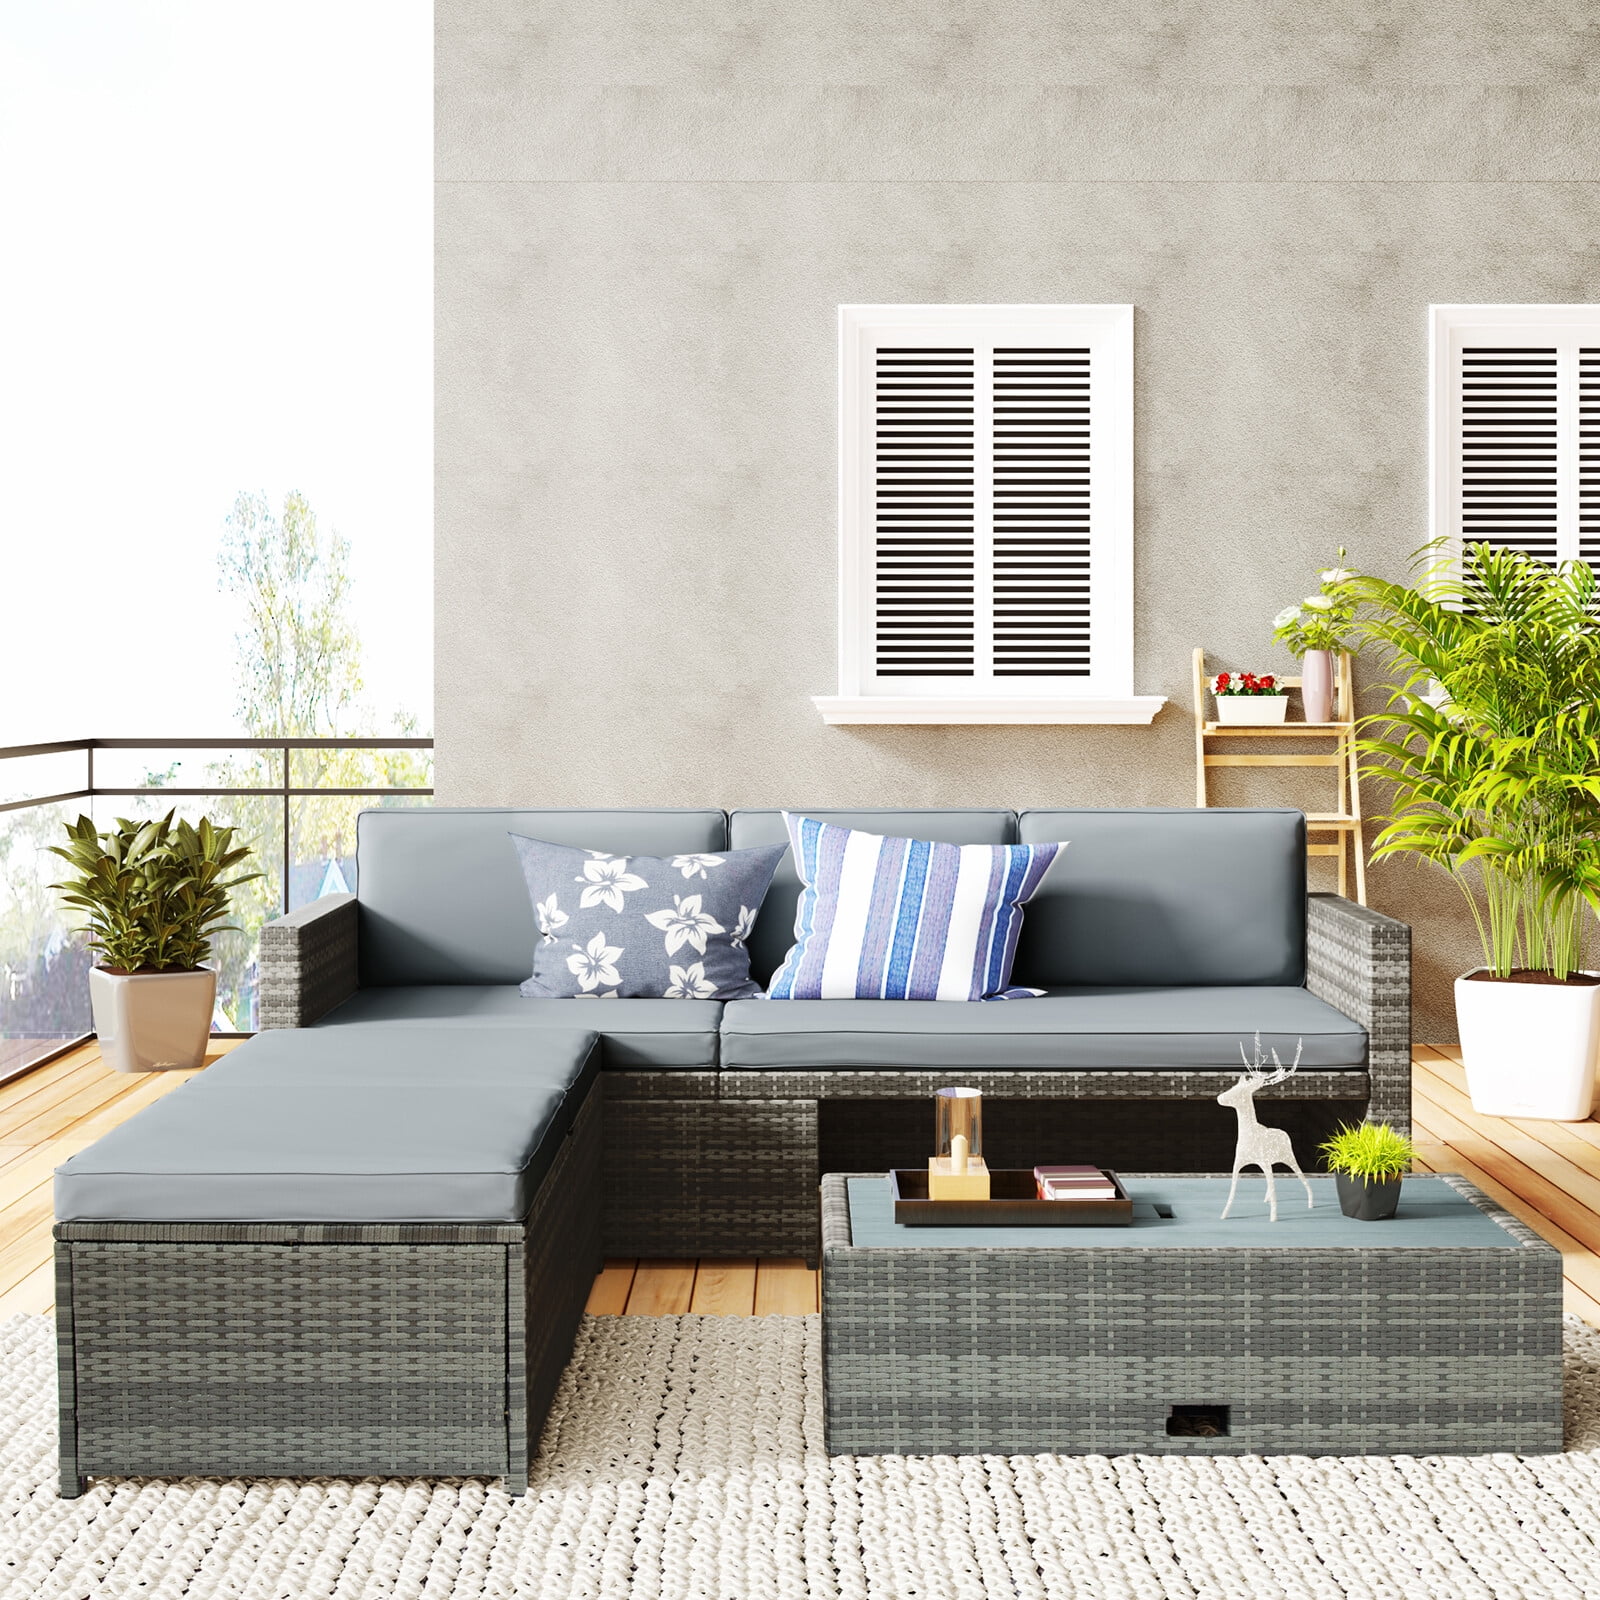 aftrekken Fantastisch exegese OVERDRIVE 4 Pieces Outdoor Patio Furniture Set All-weather PE Rattan Wicker  Sectional Sofa Sets with Retractable Table for Backyard Gray - Walmart.com